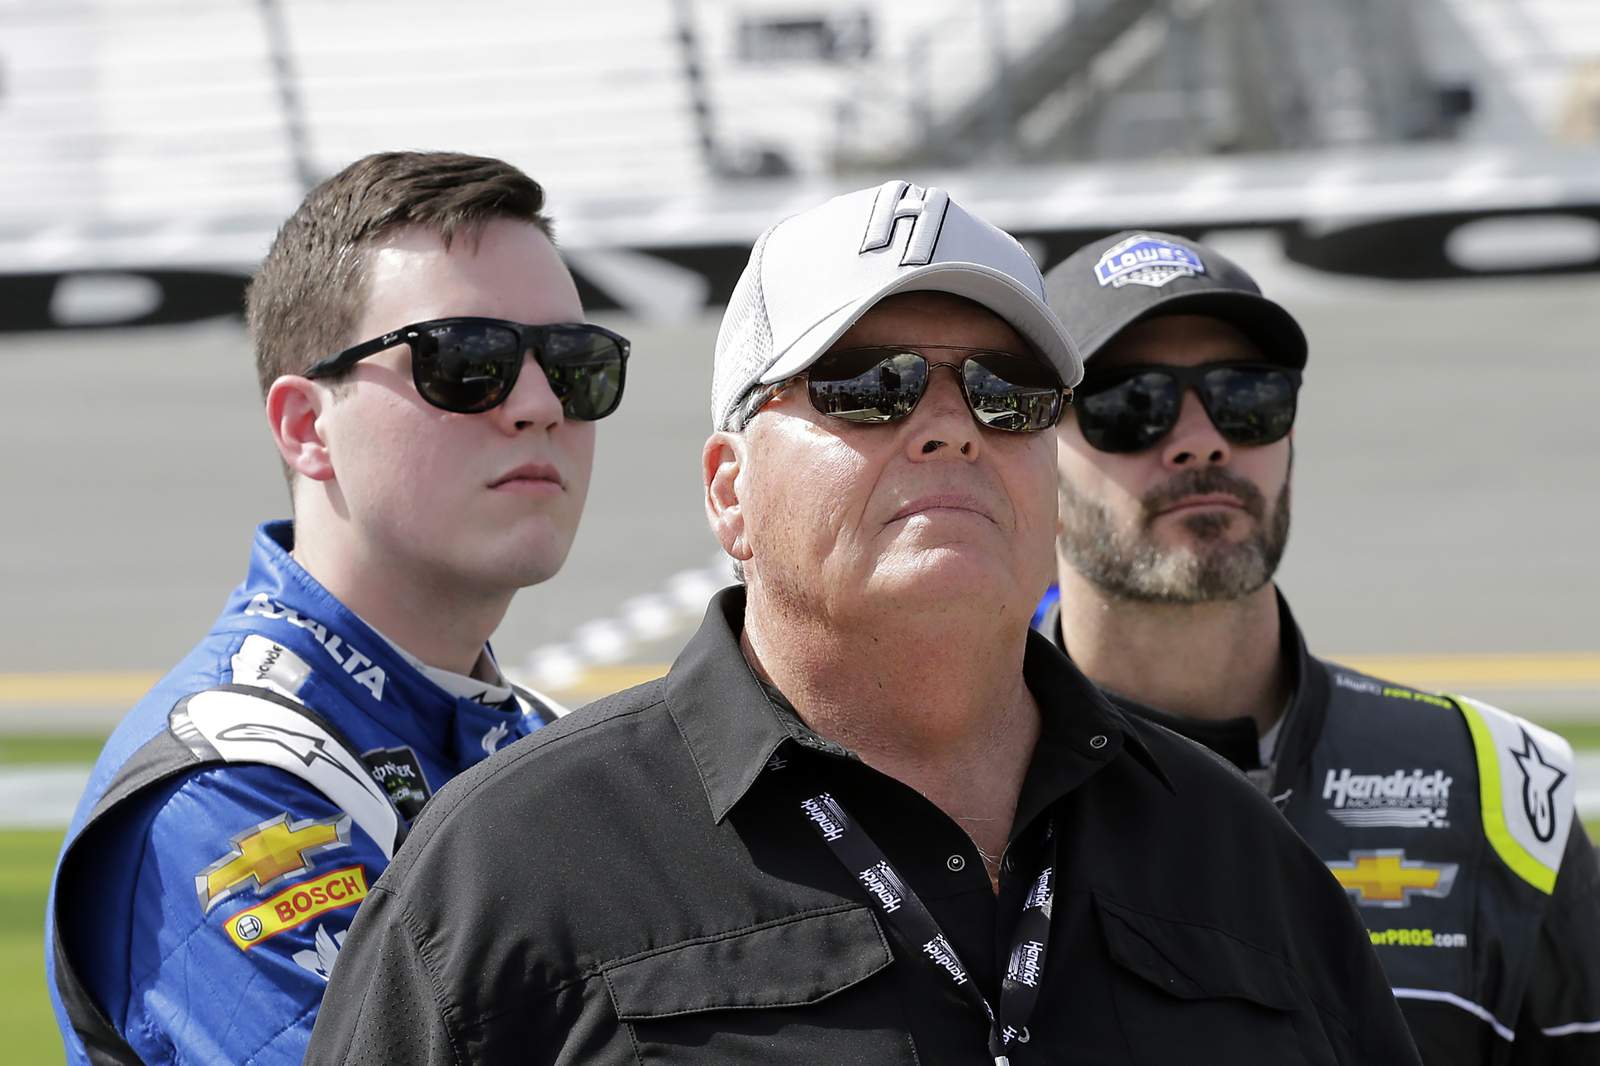 Alex Bowman shuffled to the No. 48 to replace Jimmie Johnson